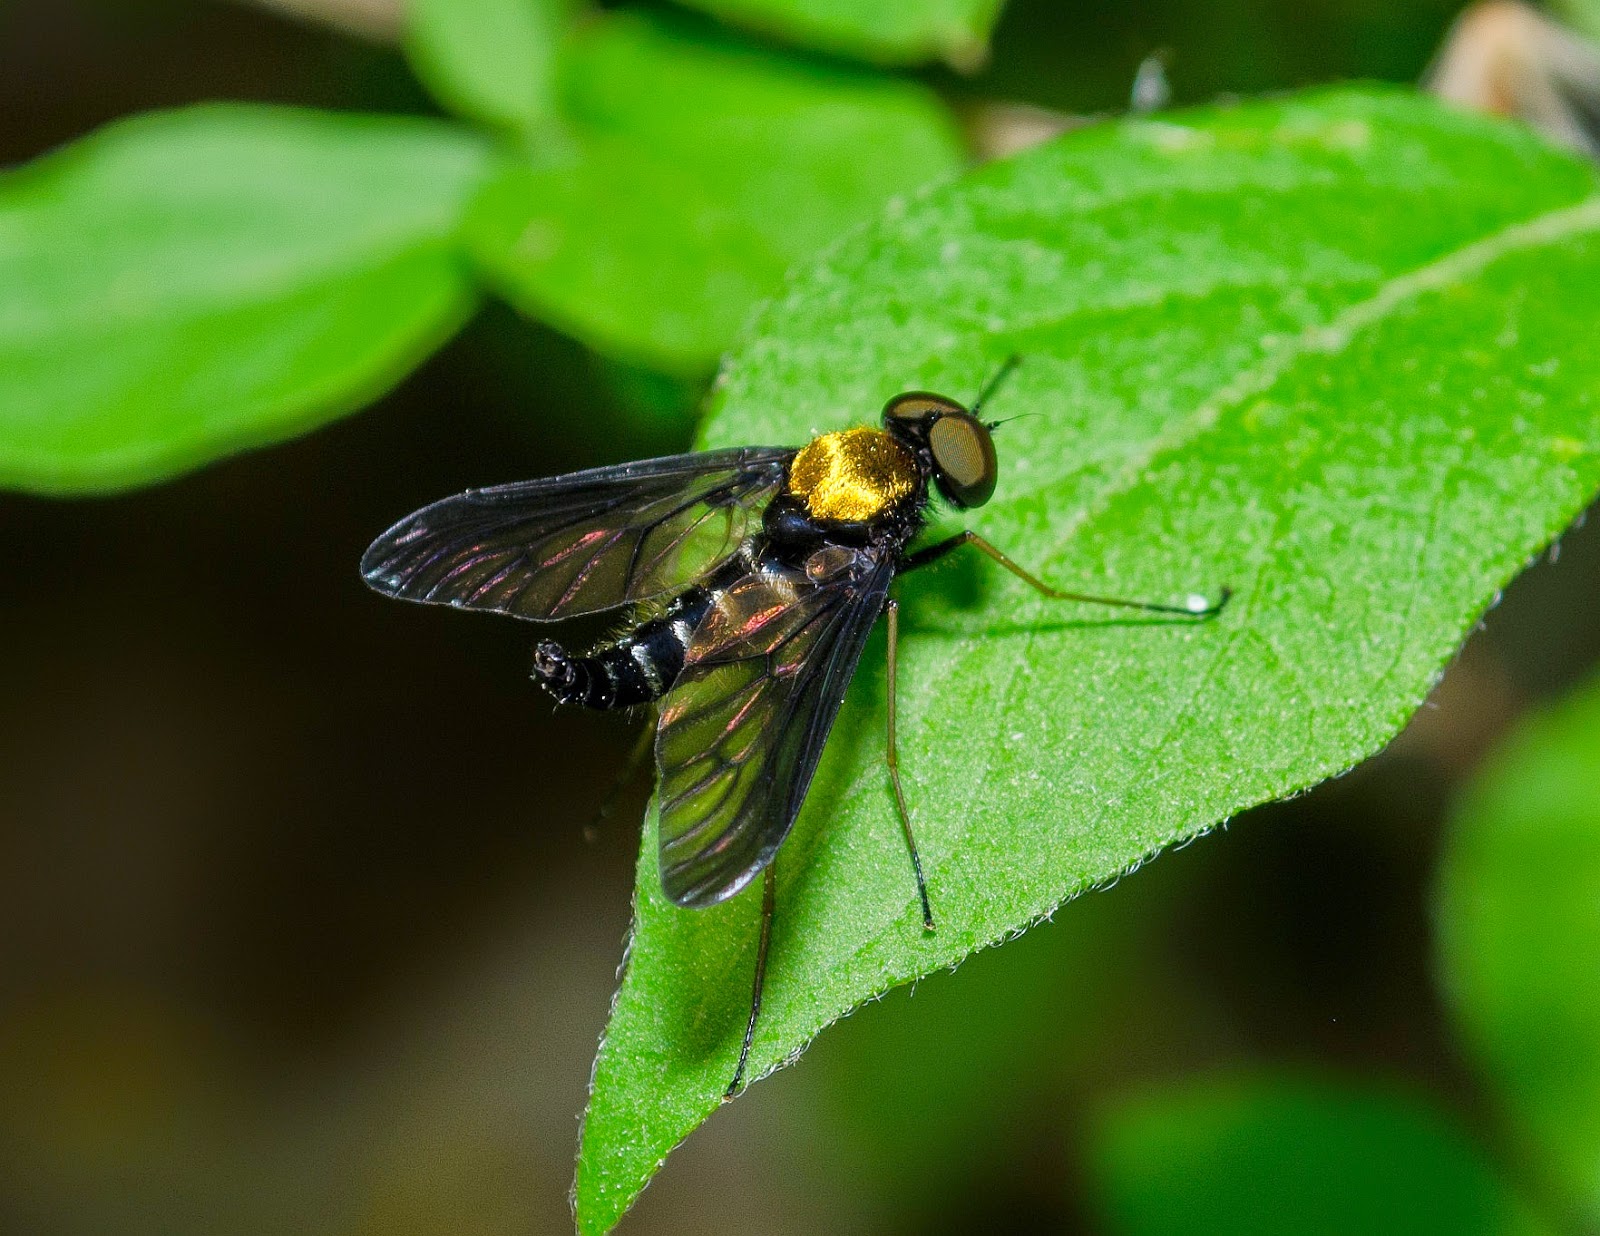  Golden-Backed Snipe Fly, Chrysopilus thoracicus